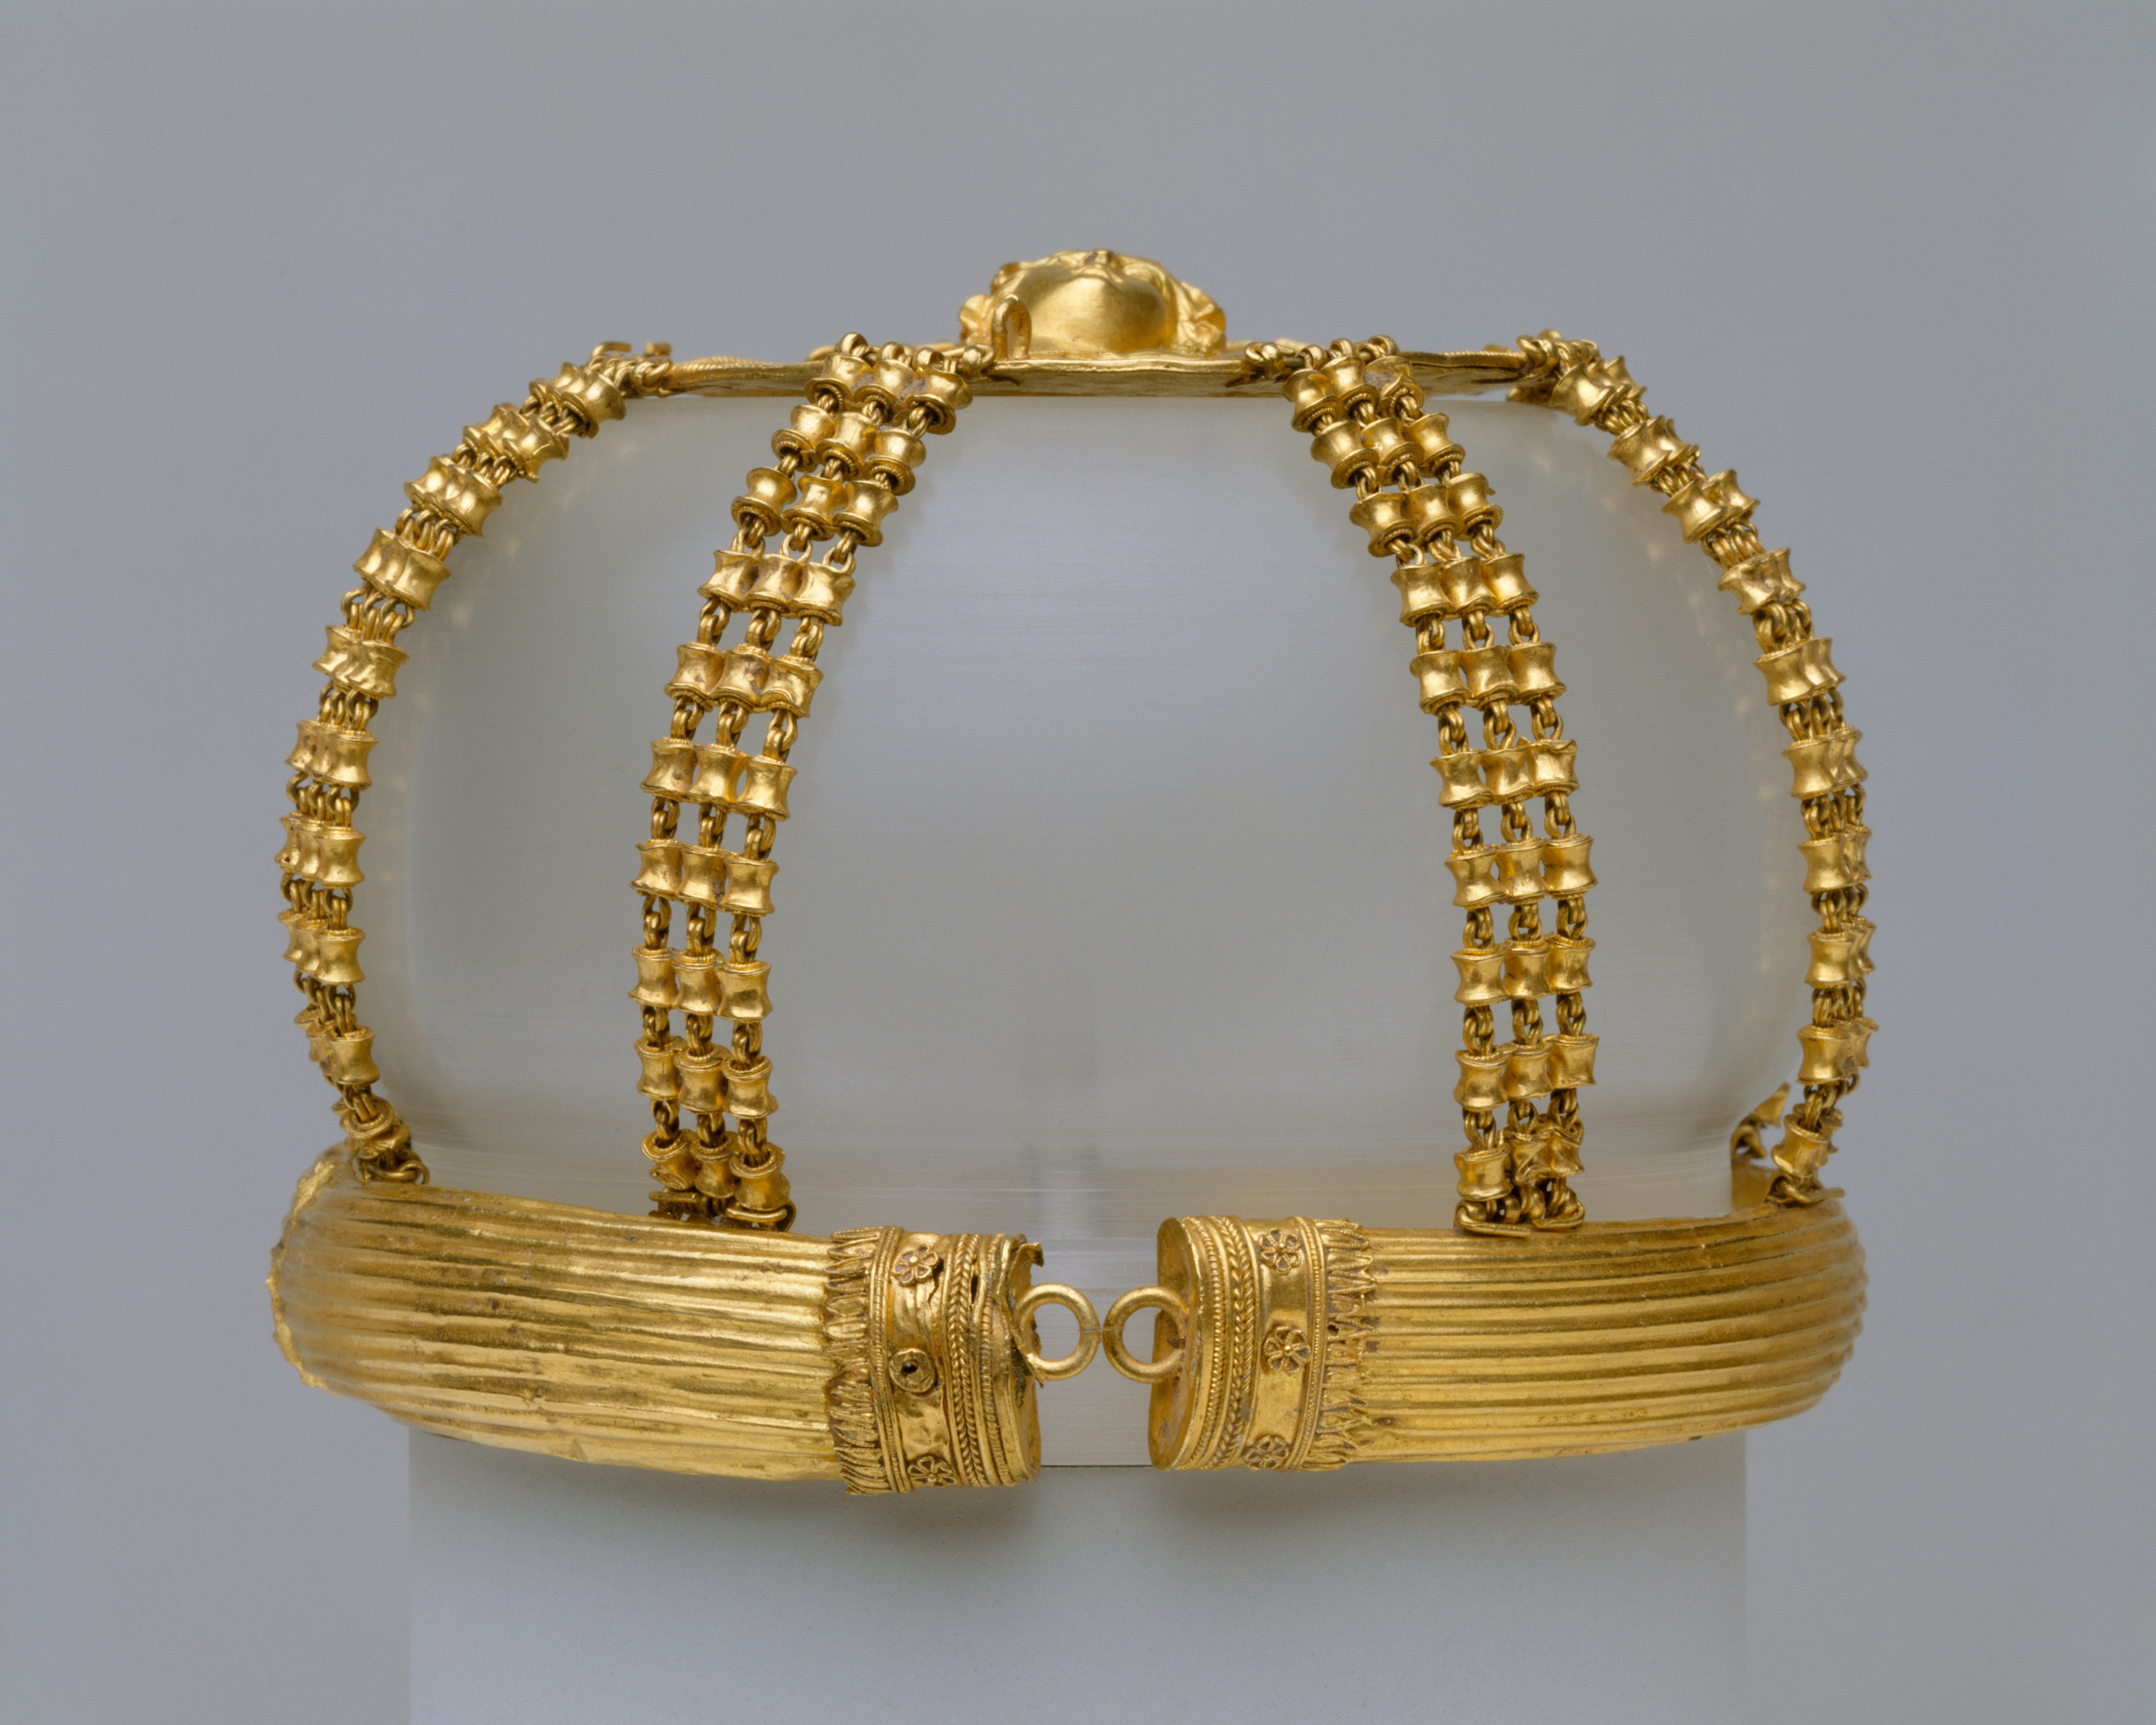 Gold openwork hairnet with medallion | Greek, Ptolemaic | Hellenistic | The Metropolitan Museum of Art